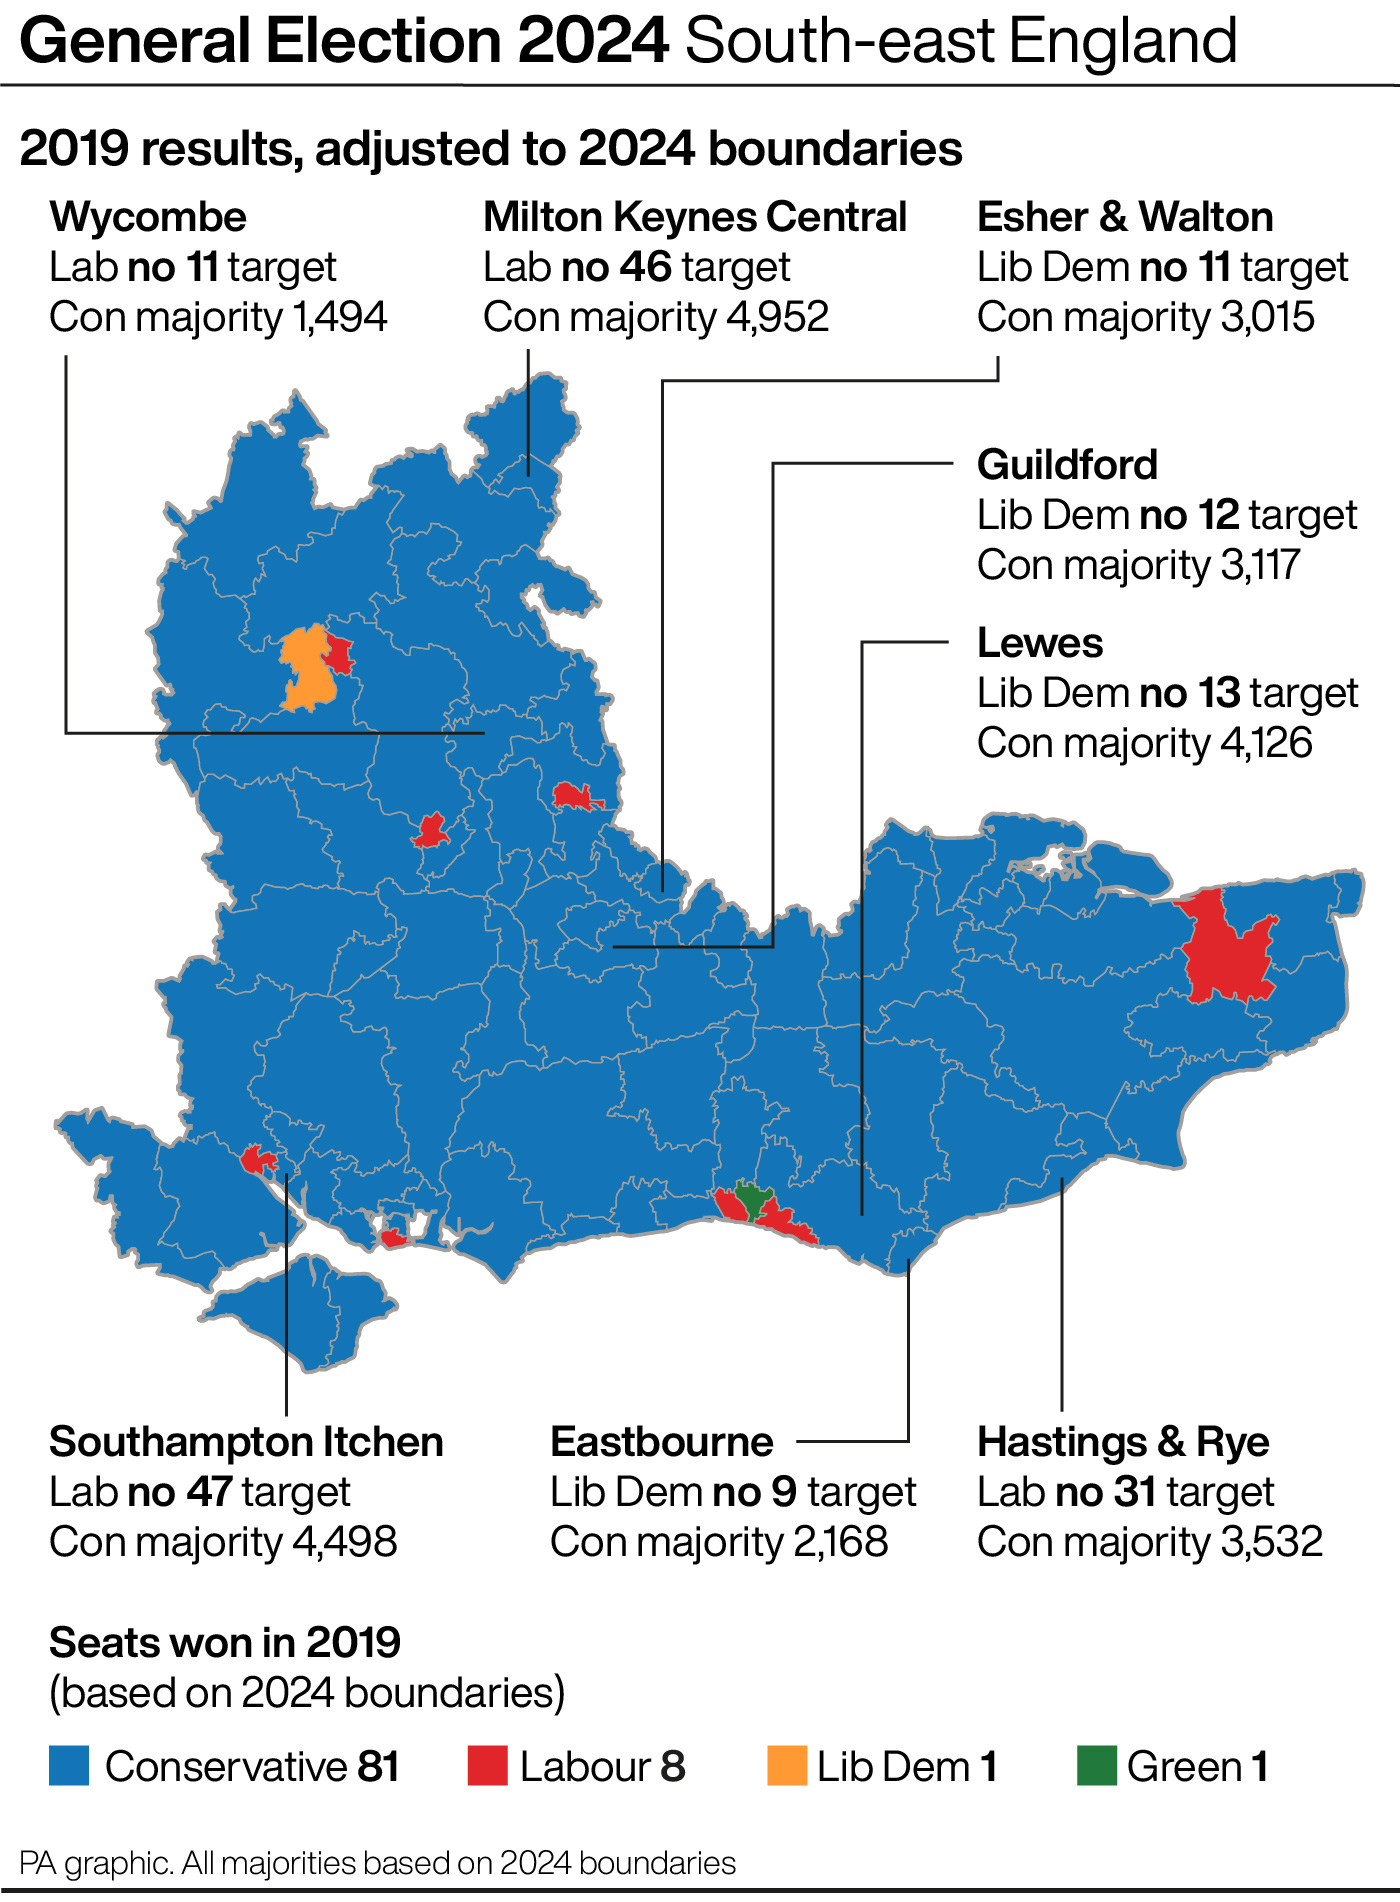 A map showing key battleground seats in south-east England at the General Election